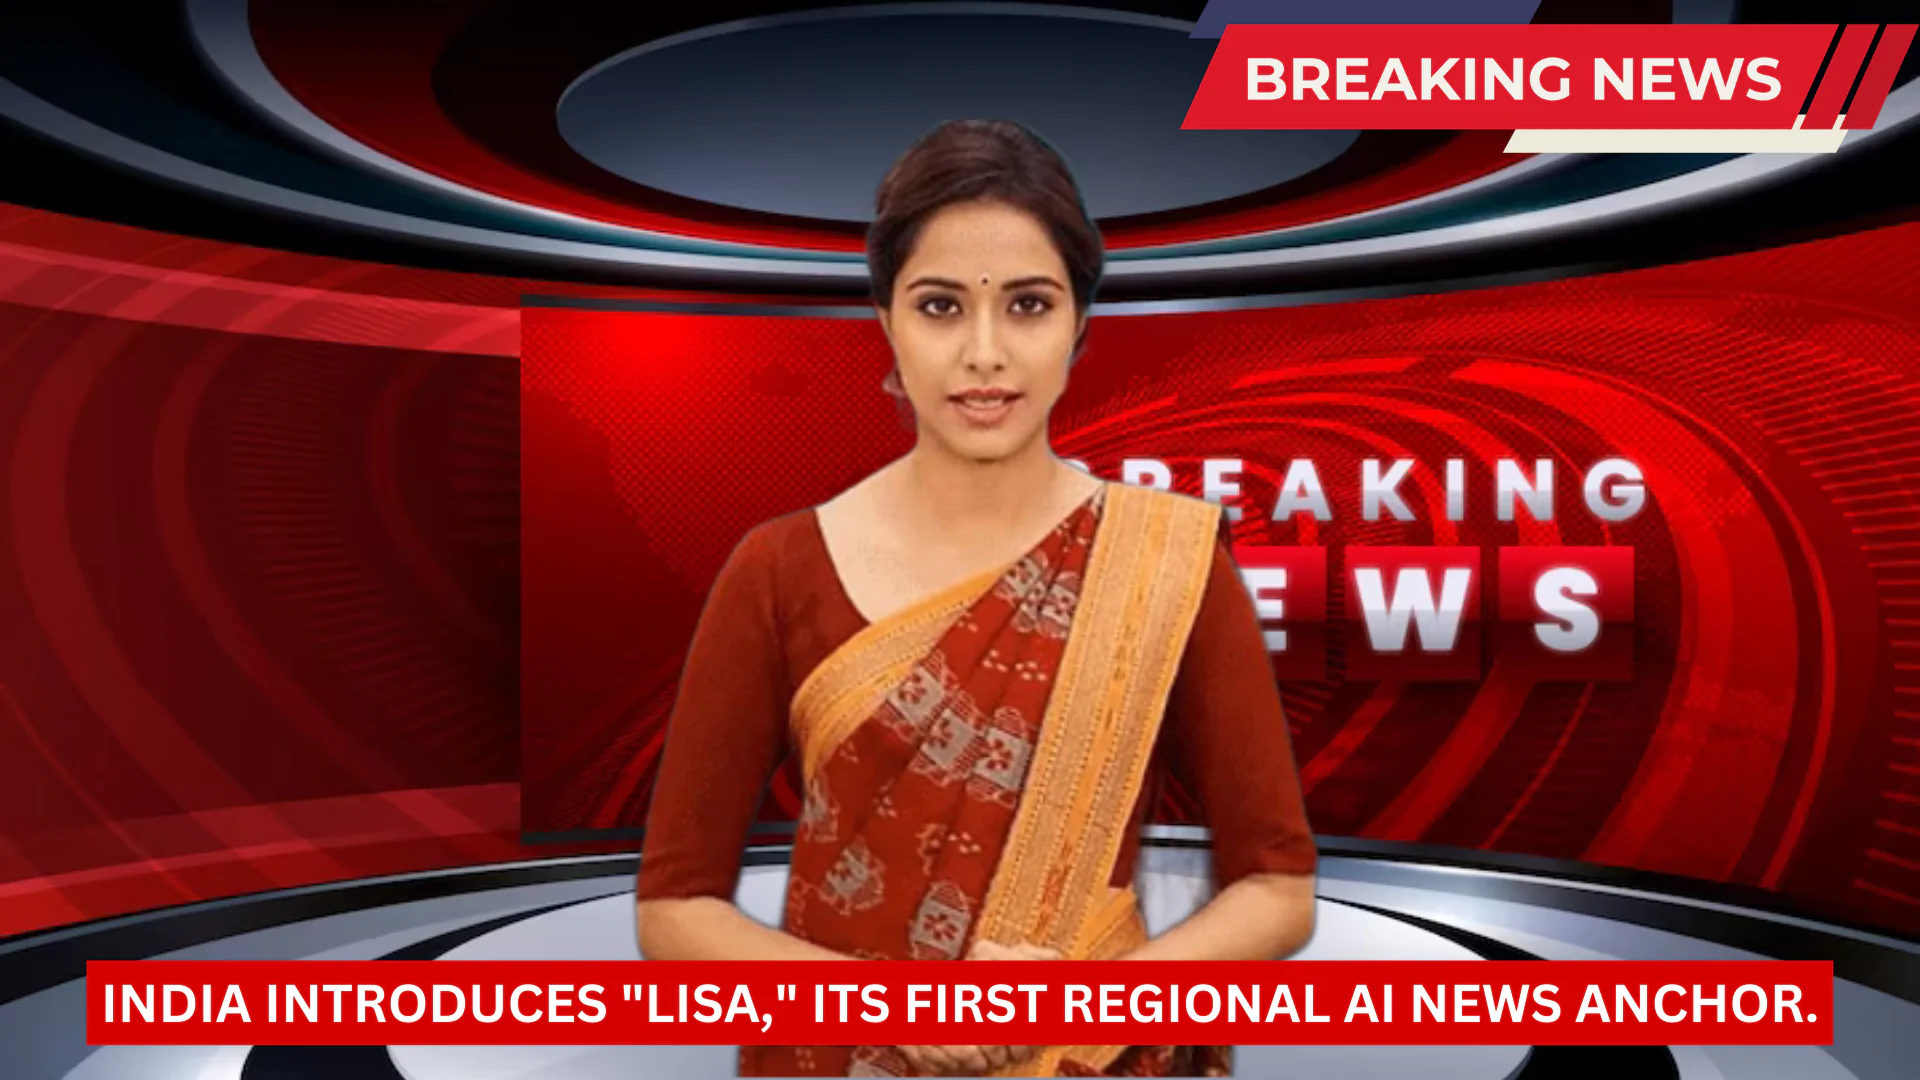 India introduces "Lisa," its first regional AI news anchor.